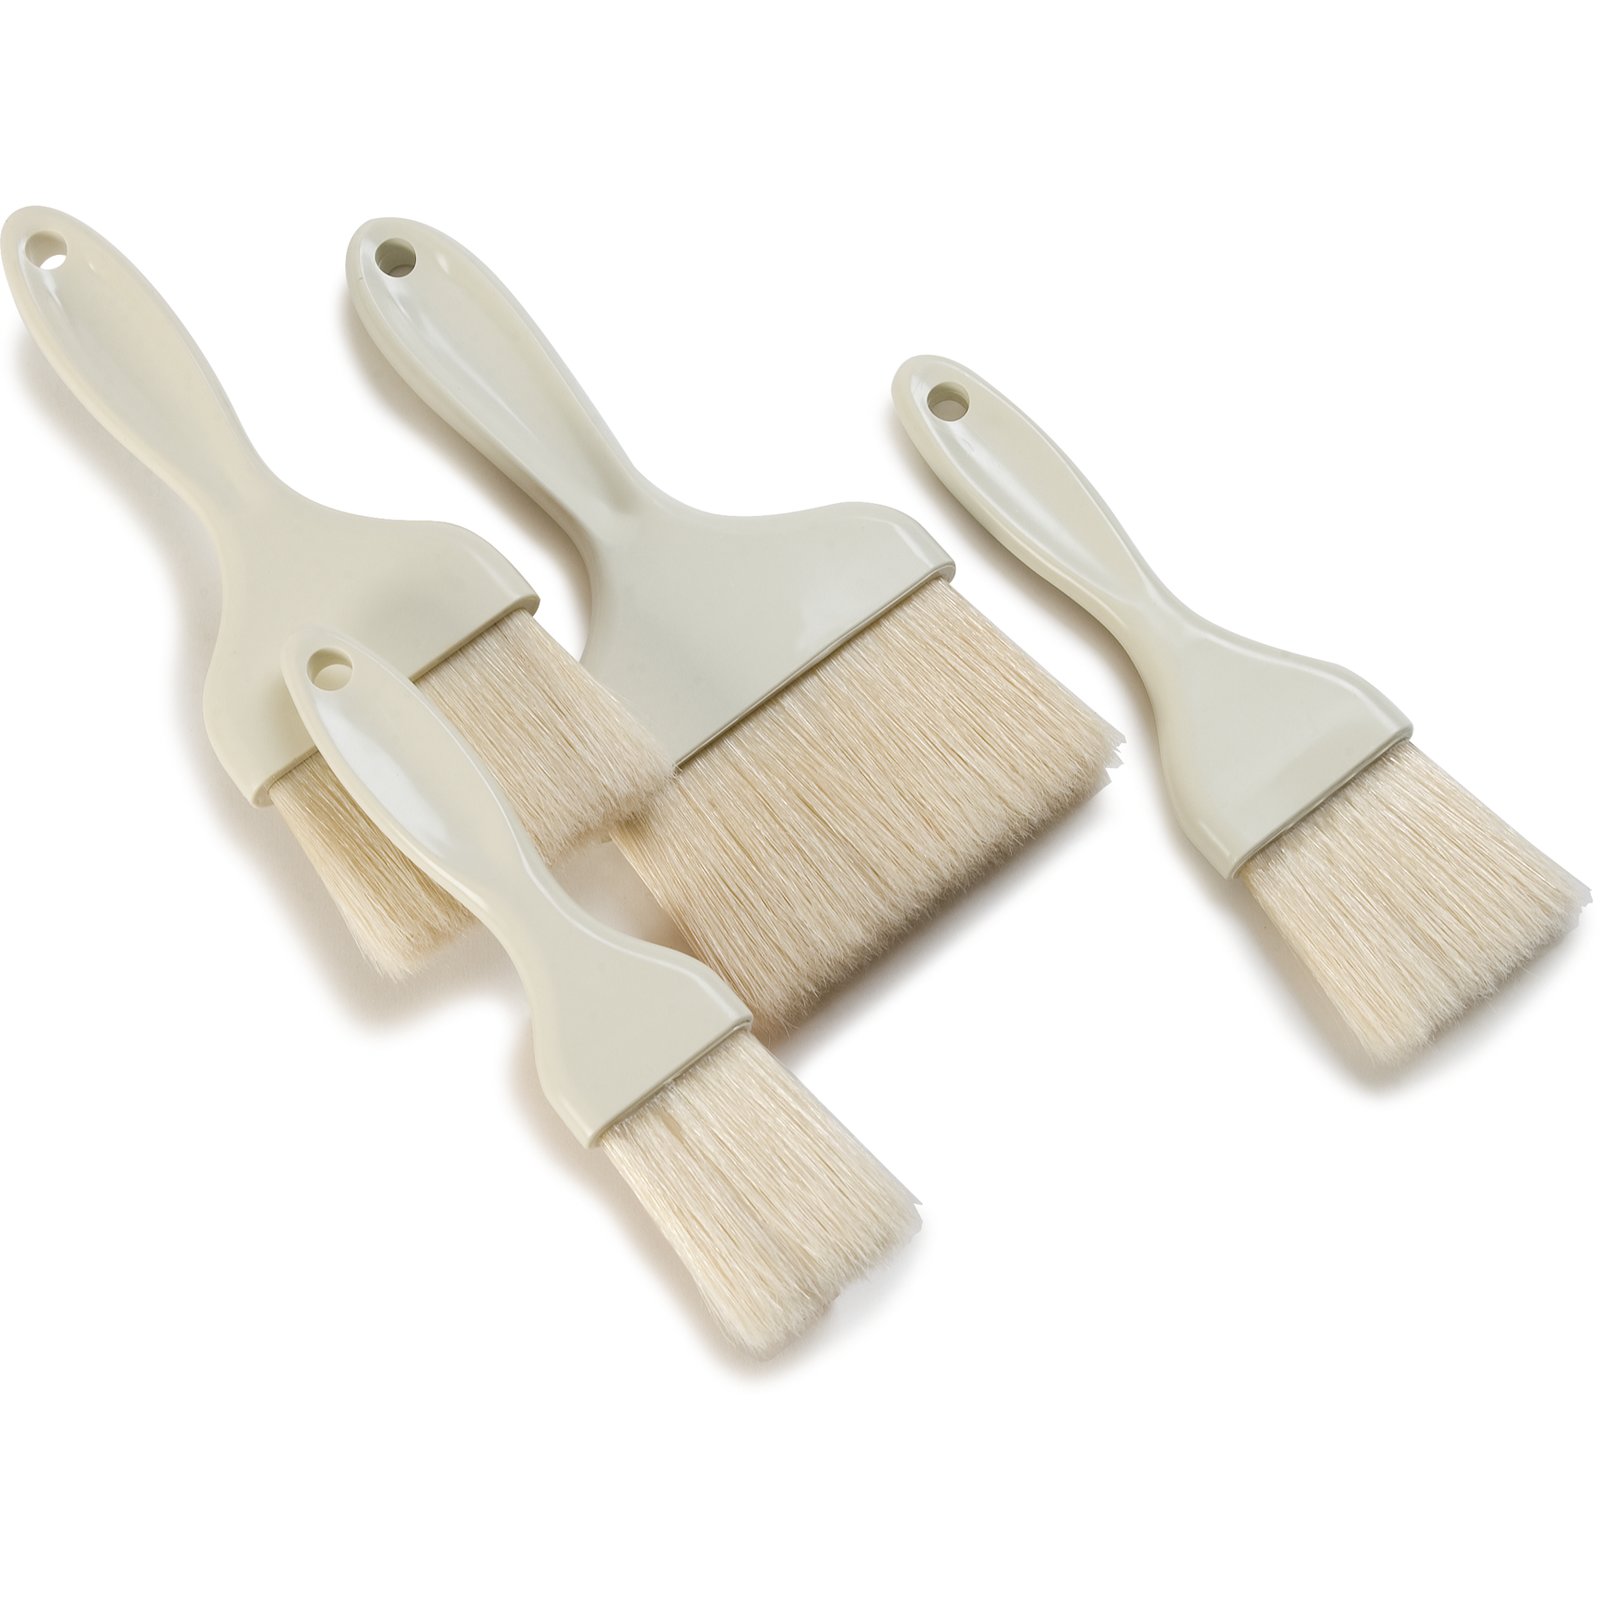 Food safe pastry brushes with wooden handle & white bristles - 200200